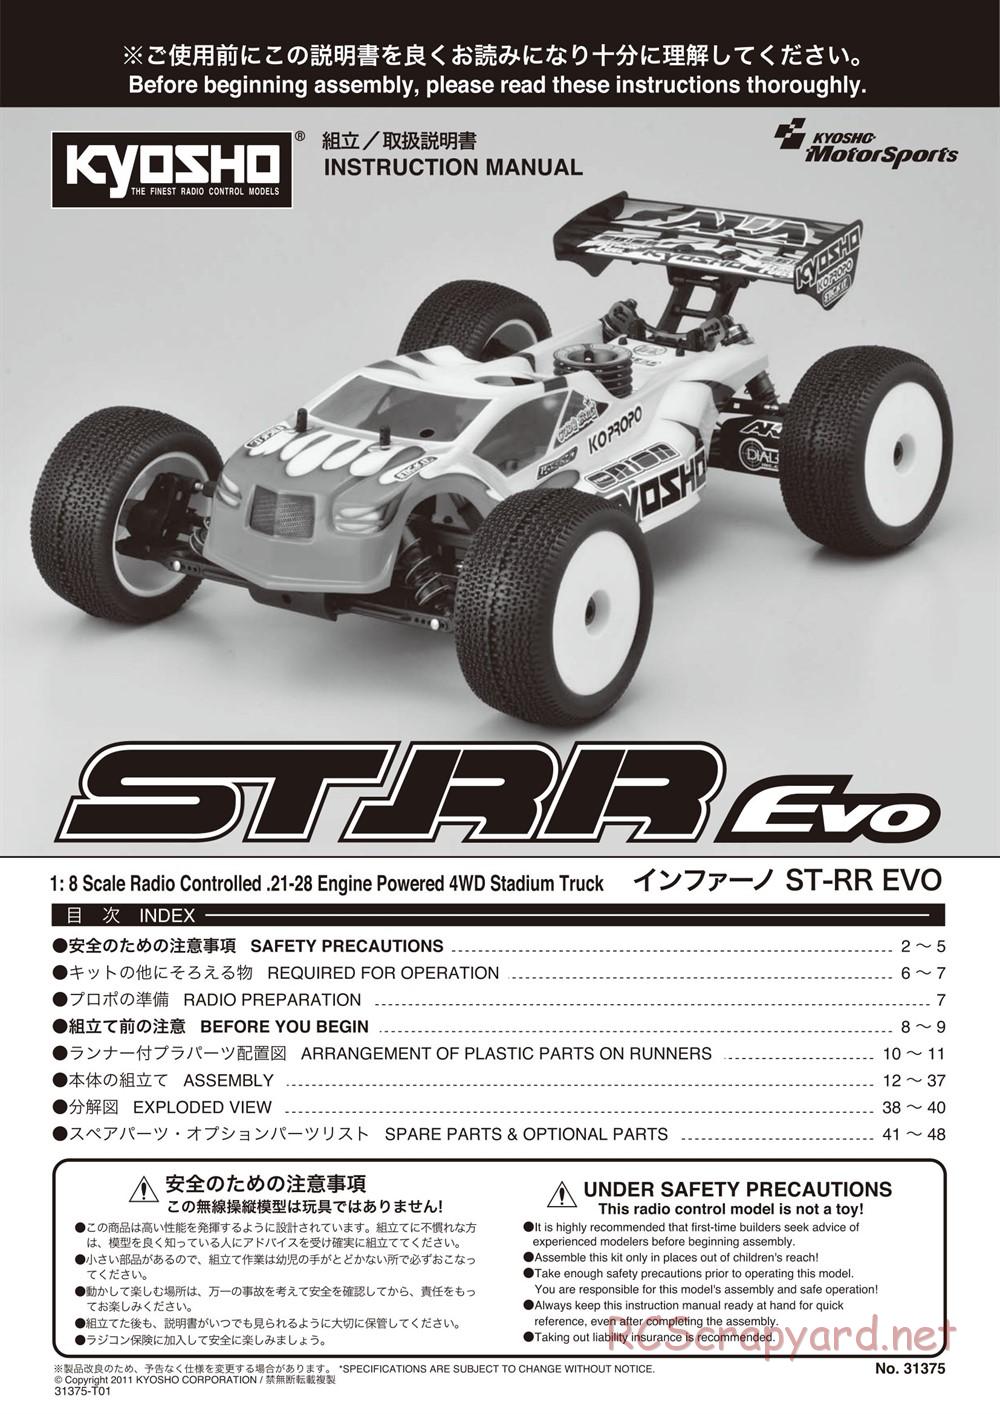 Kyosho - Inferno ST-RR Evo.2 - Manual - Page 5